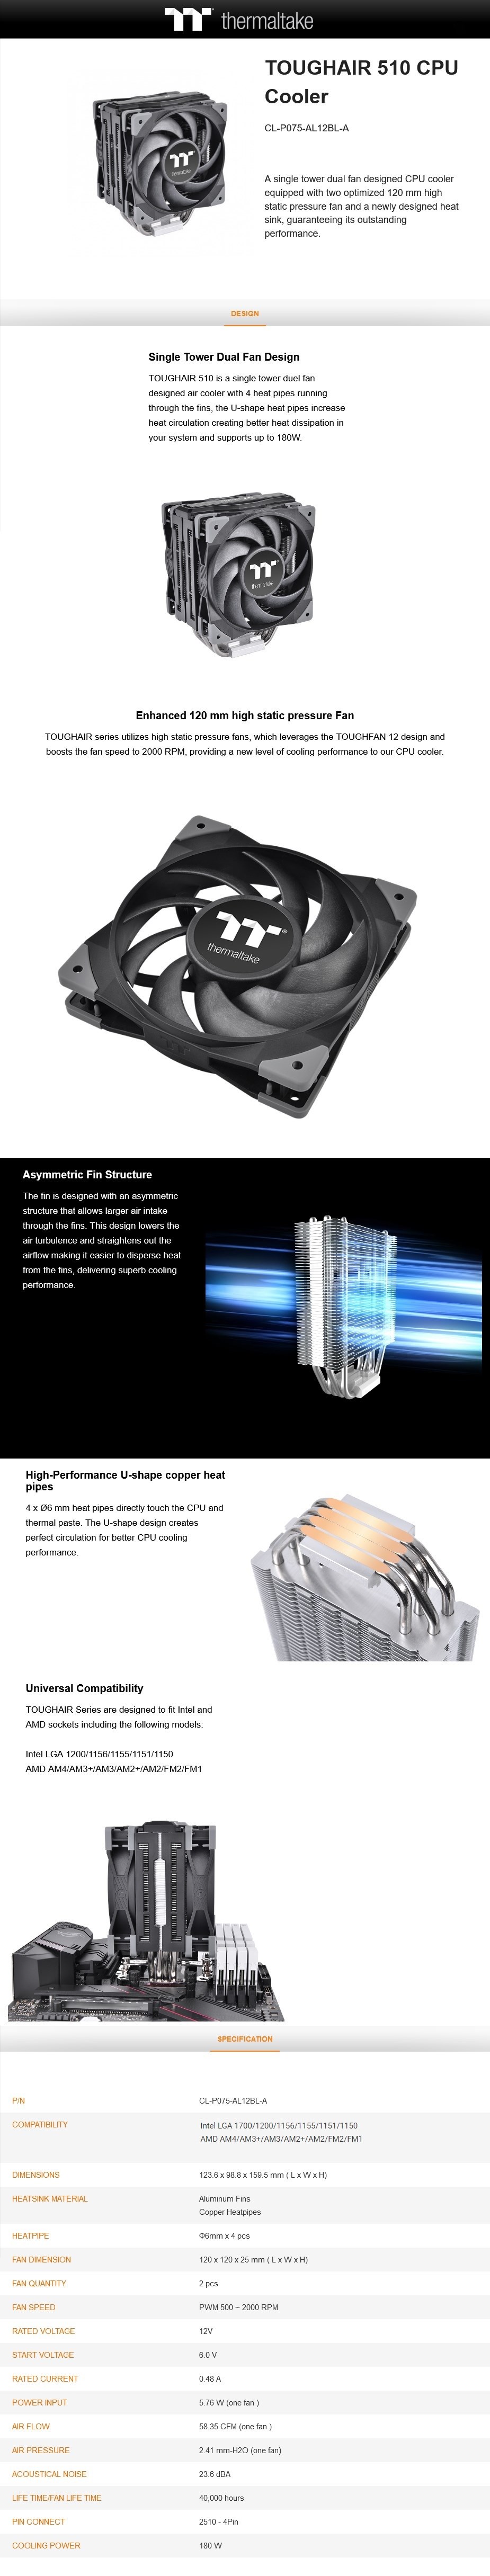 A large marketing image providing additional information about the product Thermaltake Toughair 510 - Dual Fan CPU Cooler - Additional alt info not provided